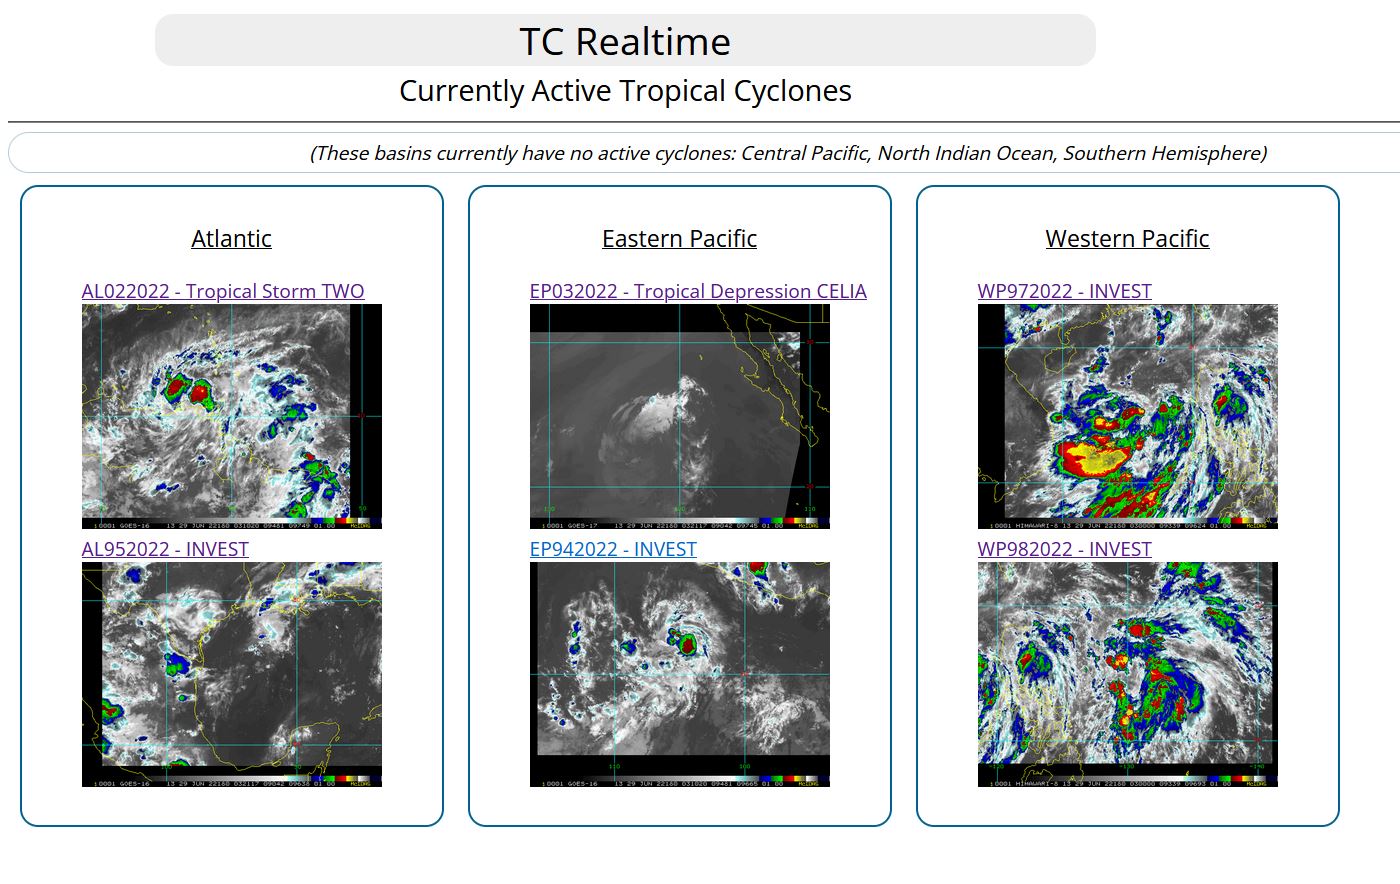 Tropical Cyclone Formation Alert issued for Invest 97W and Invest 94E// TC 02L slowly intensifying, 29/03utc